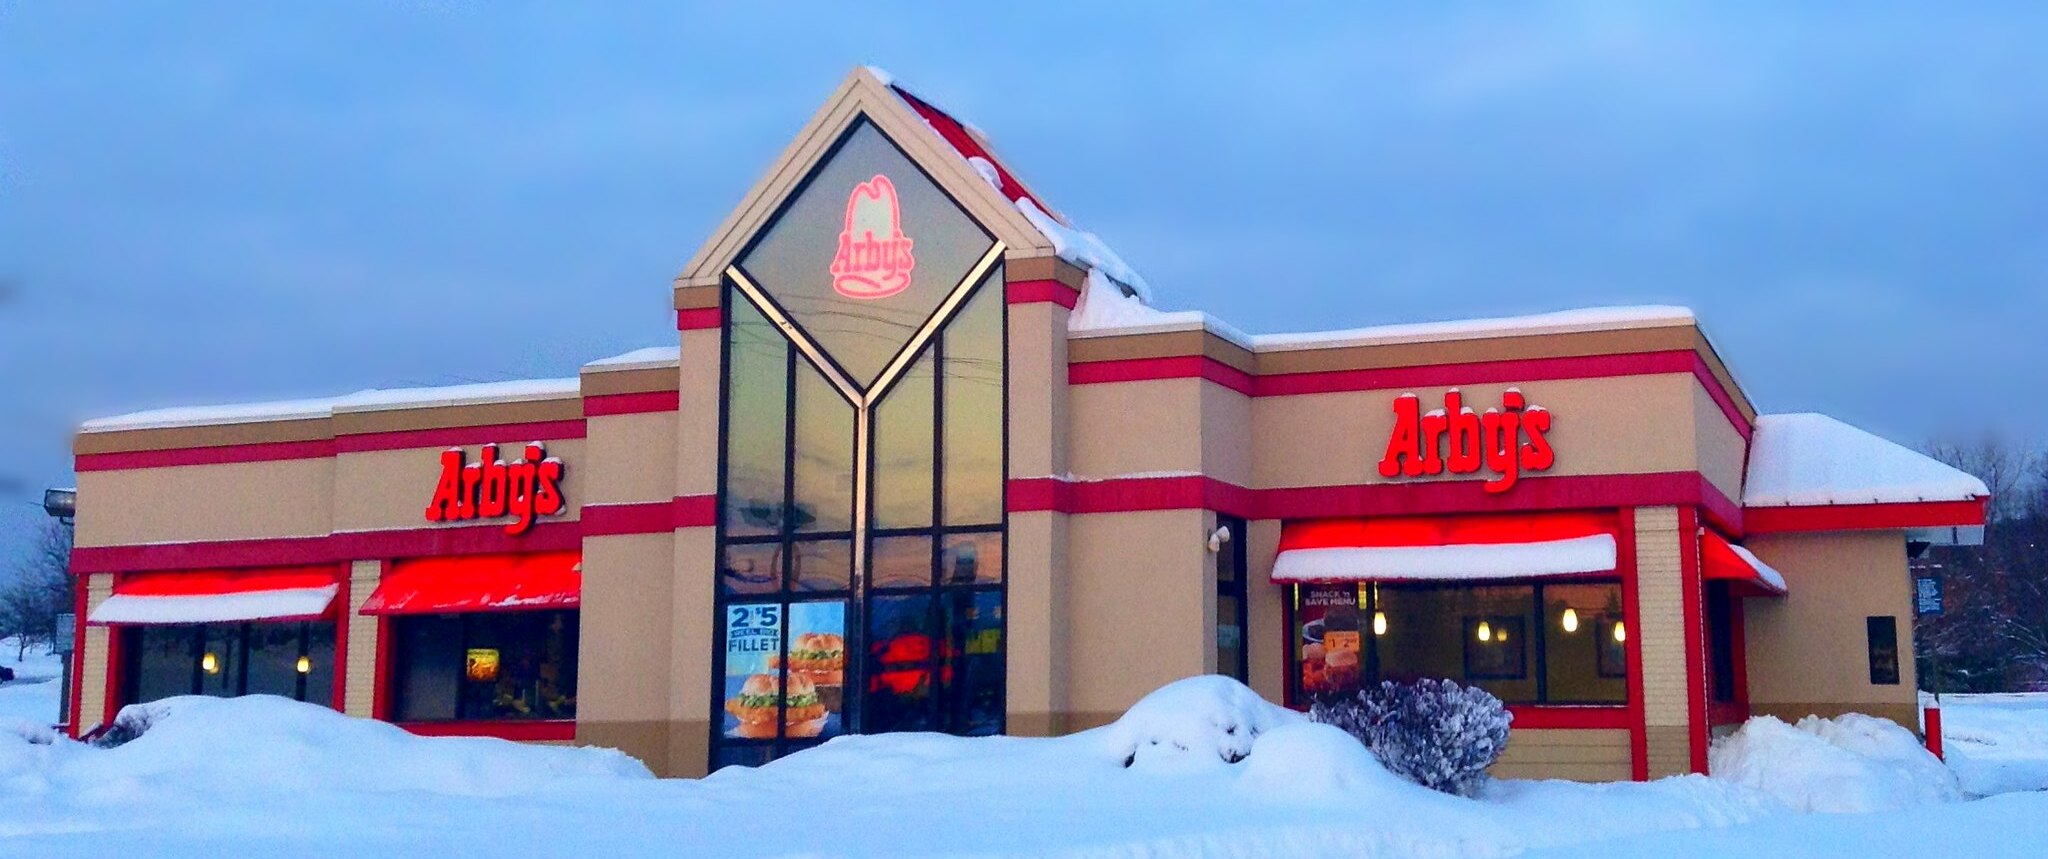 Arby's storefront in the snow.